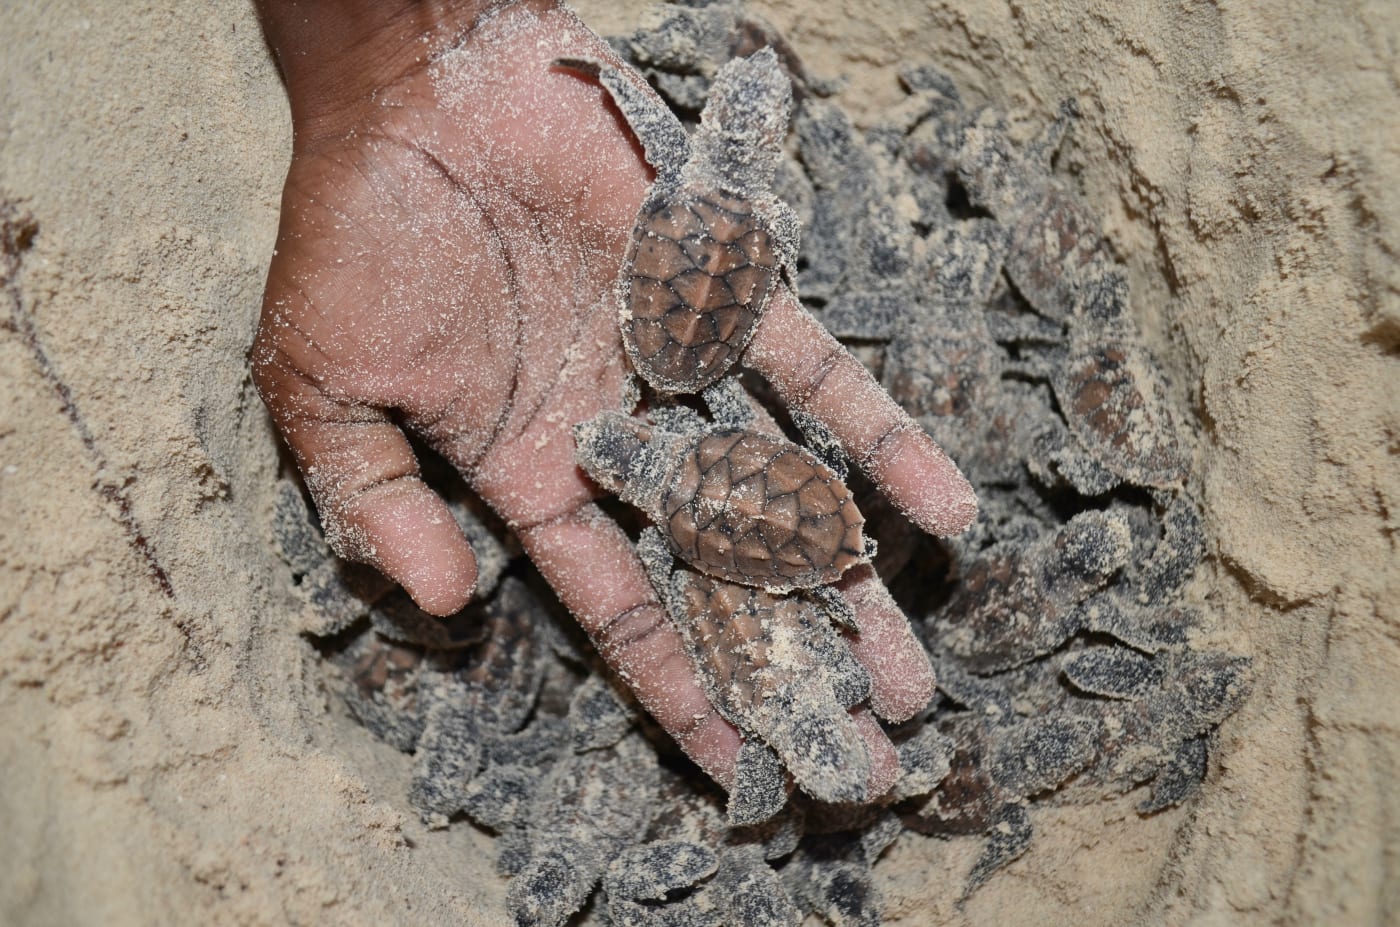 Hawksbill turtle hatchlings (Eretmochelys imbricata) in hand, Papua New Guinea. March 2017.